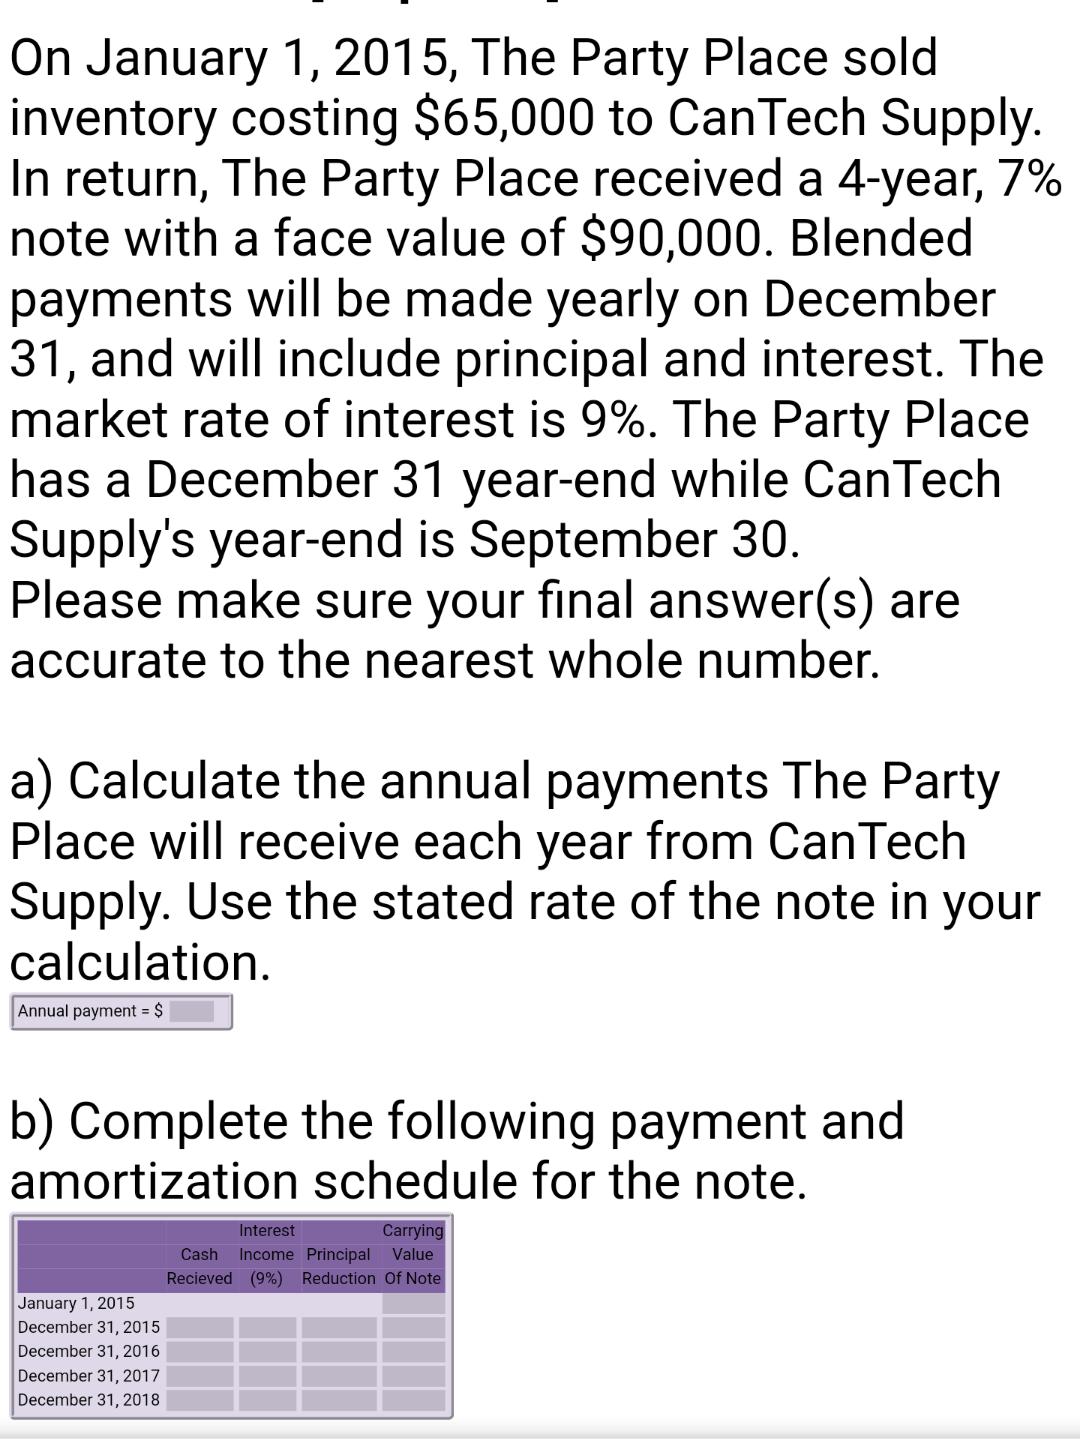 On January 1, 2015, The Party Place sold inventory costing $65,000 to CanTech Supply. In return, The Party Place received a 4